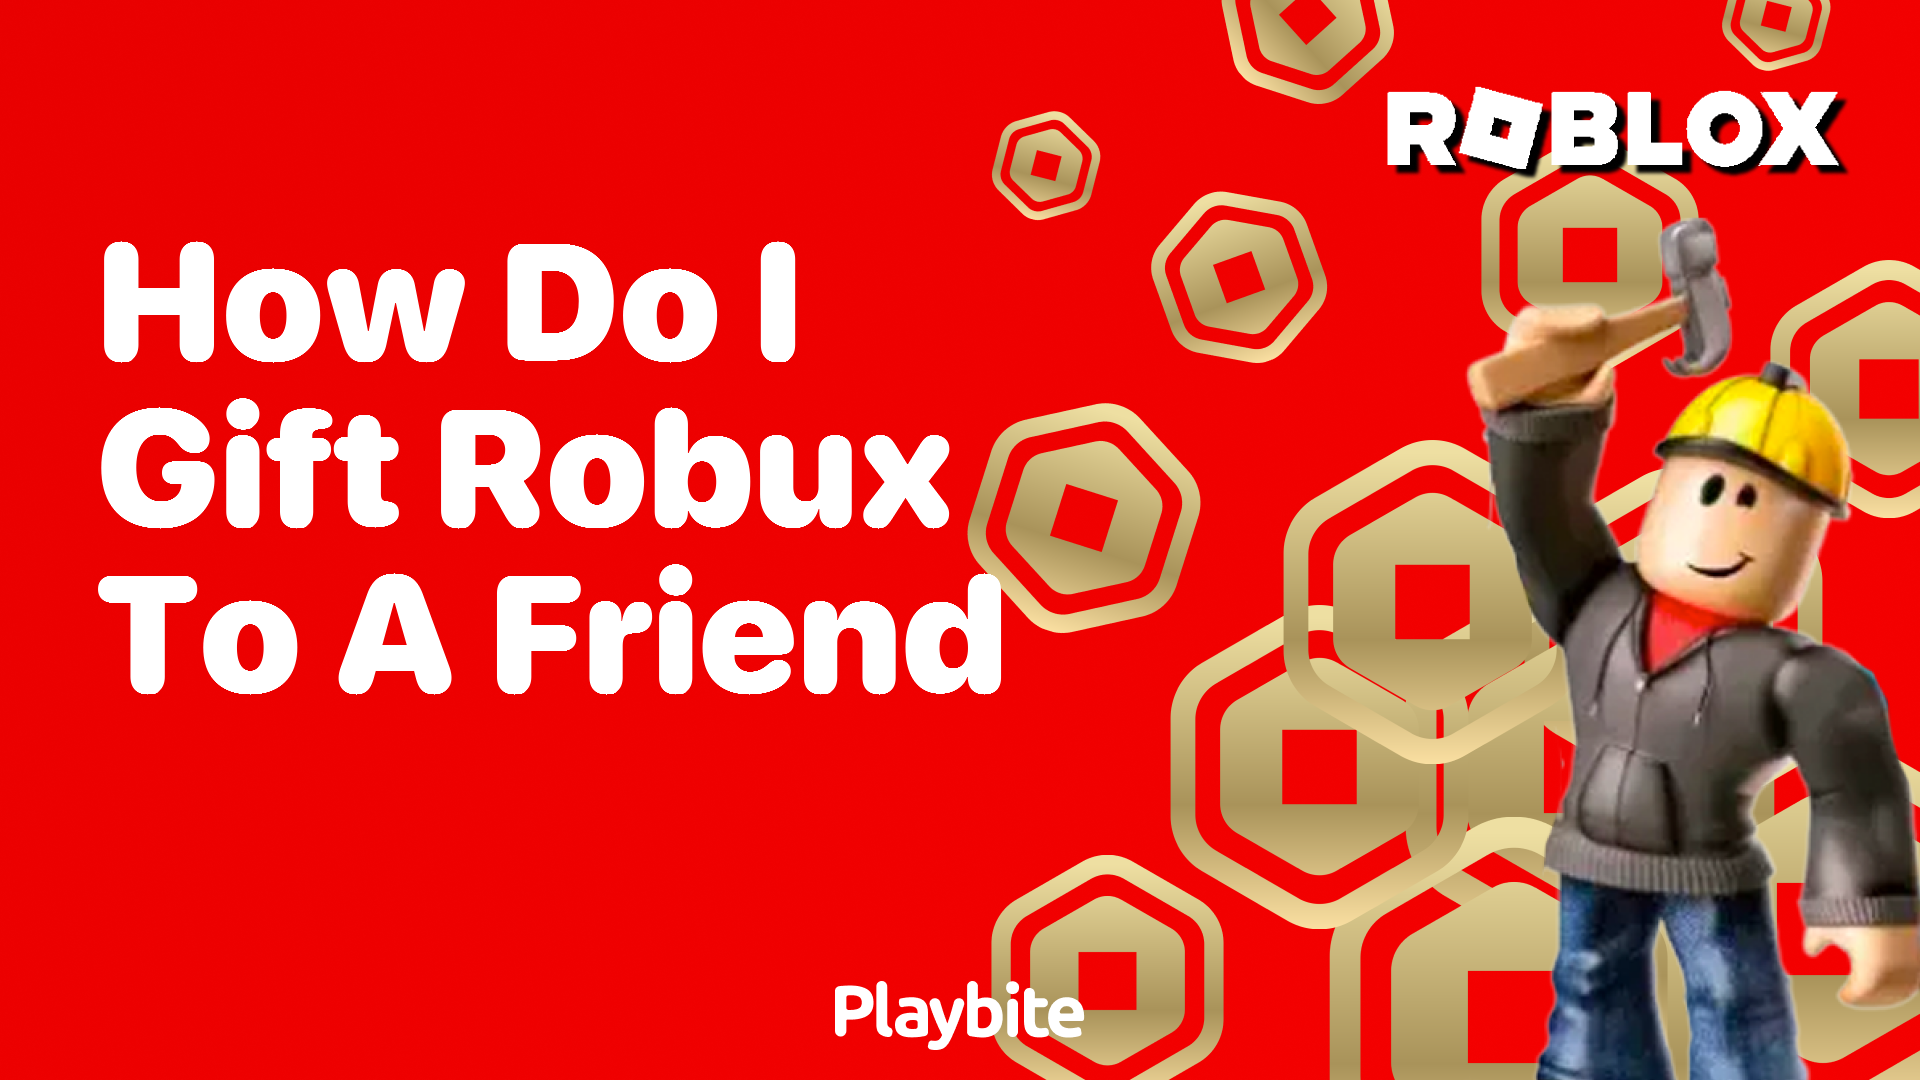 How Do I Gift Robux to a Friend? Unwrapping the Answer!